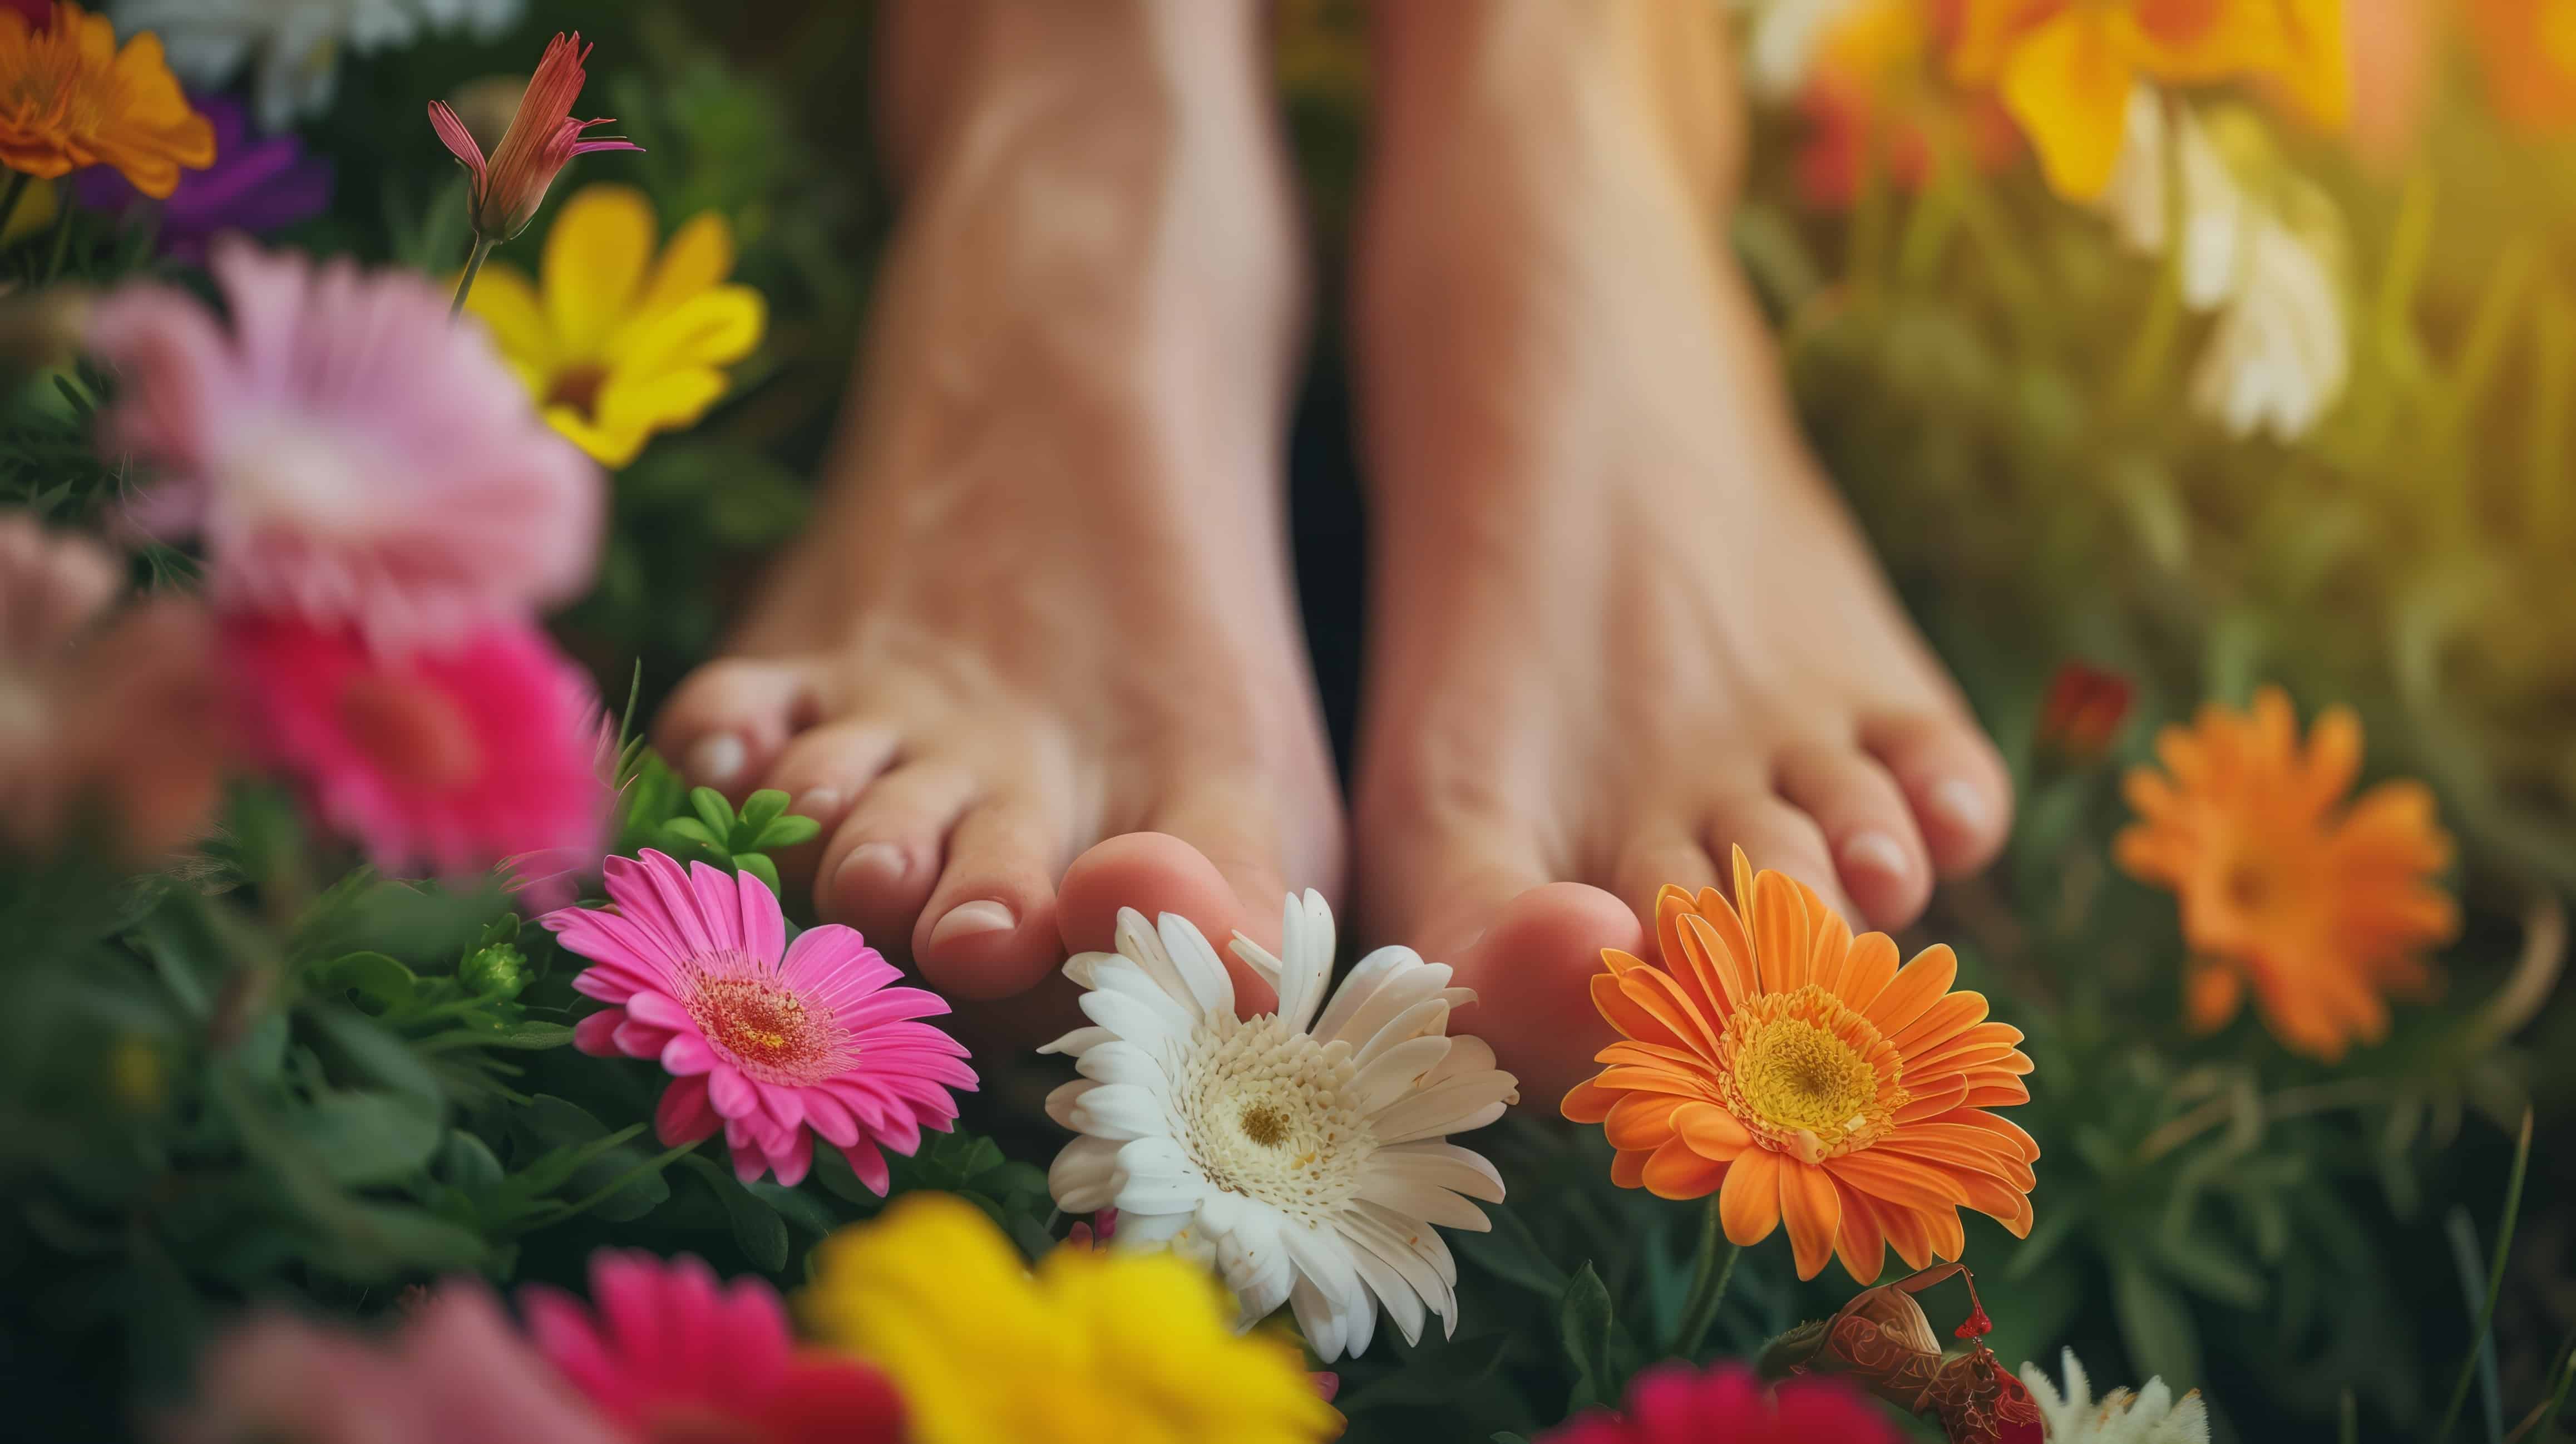 Bare Feet Amidst Blossoming Flowers in Springtime Garden